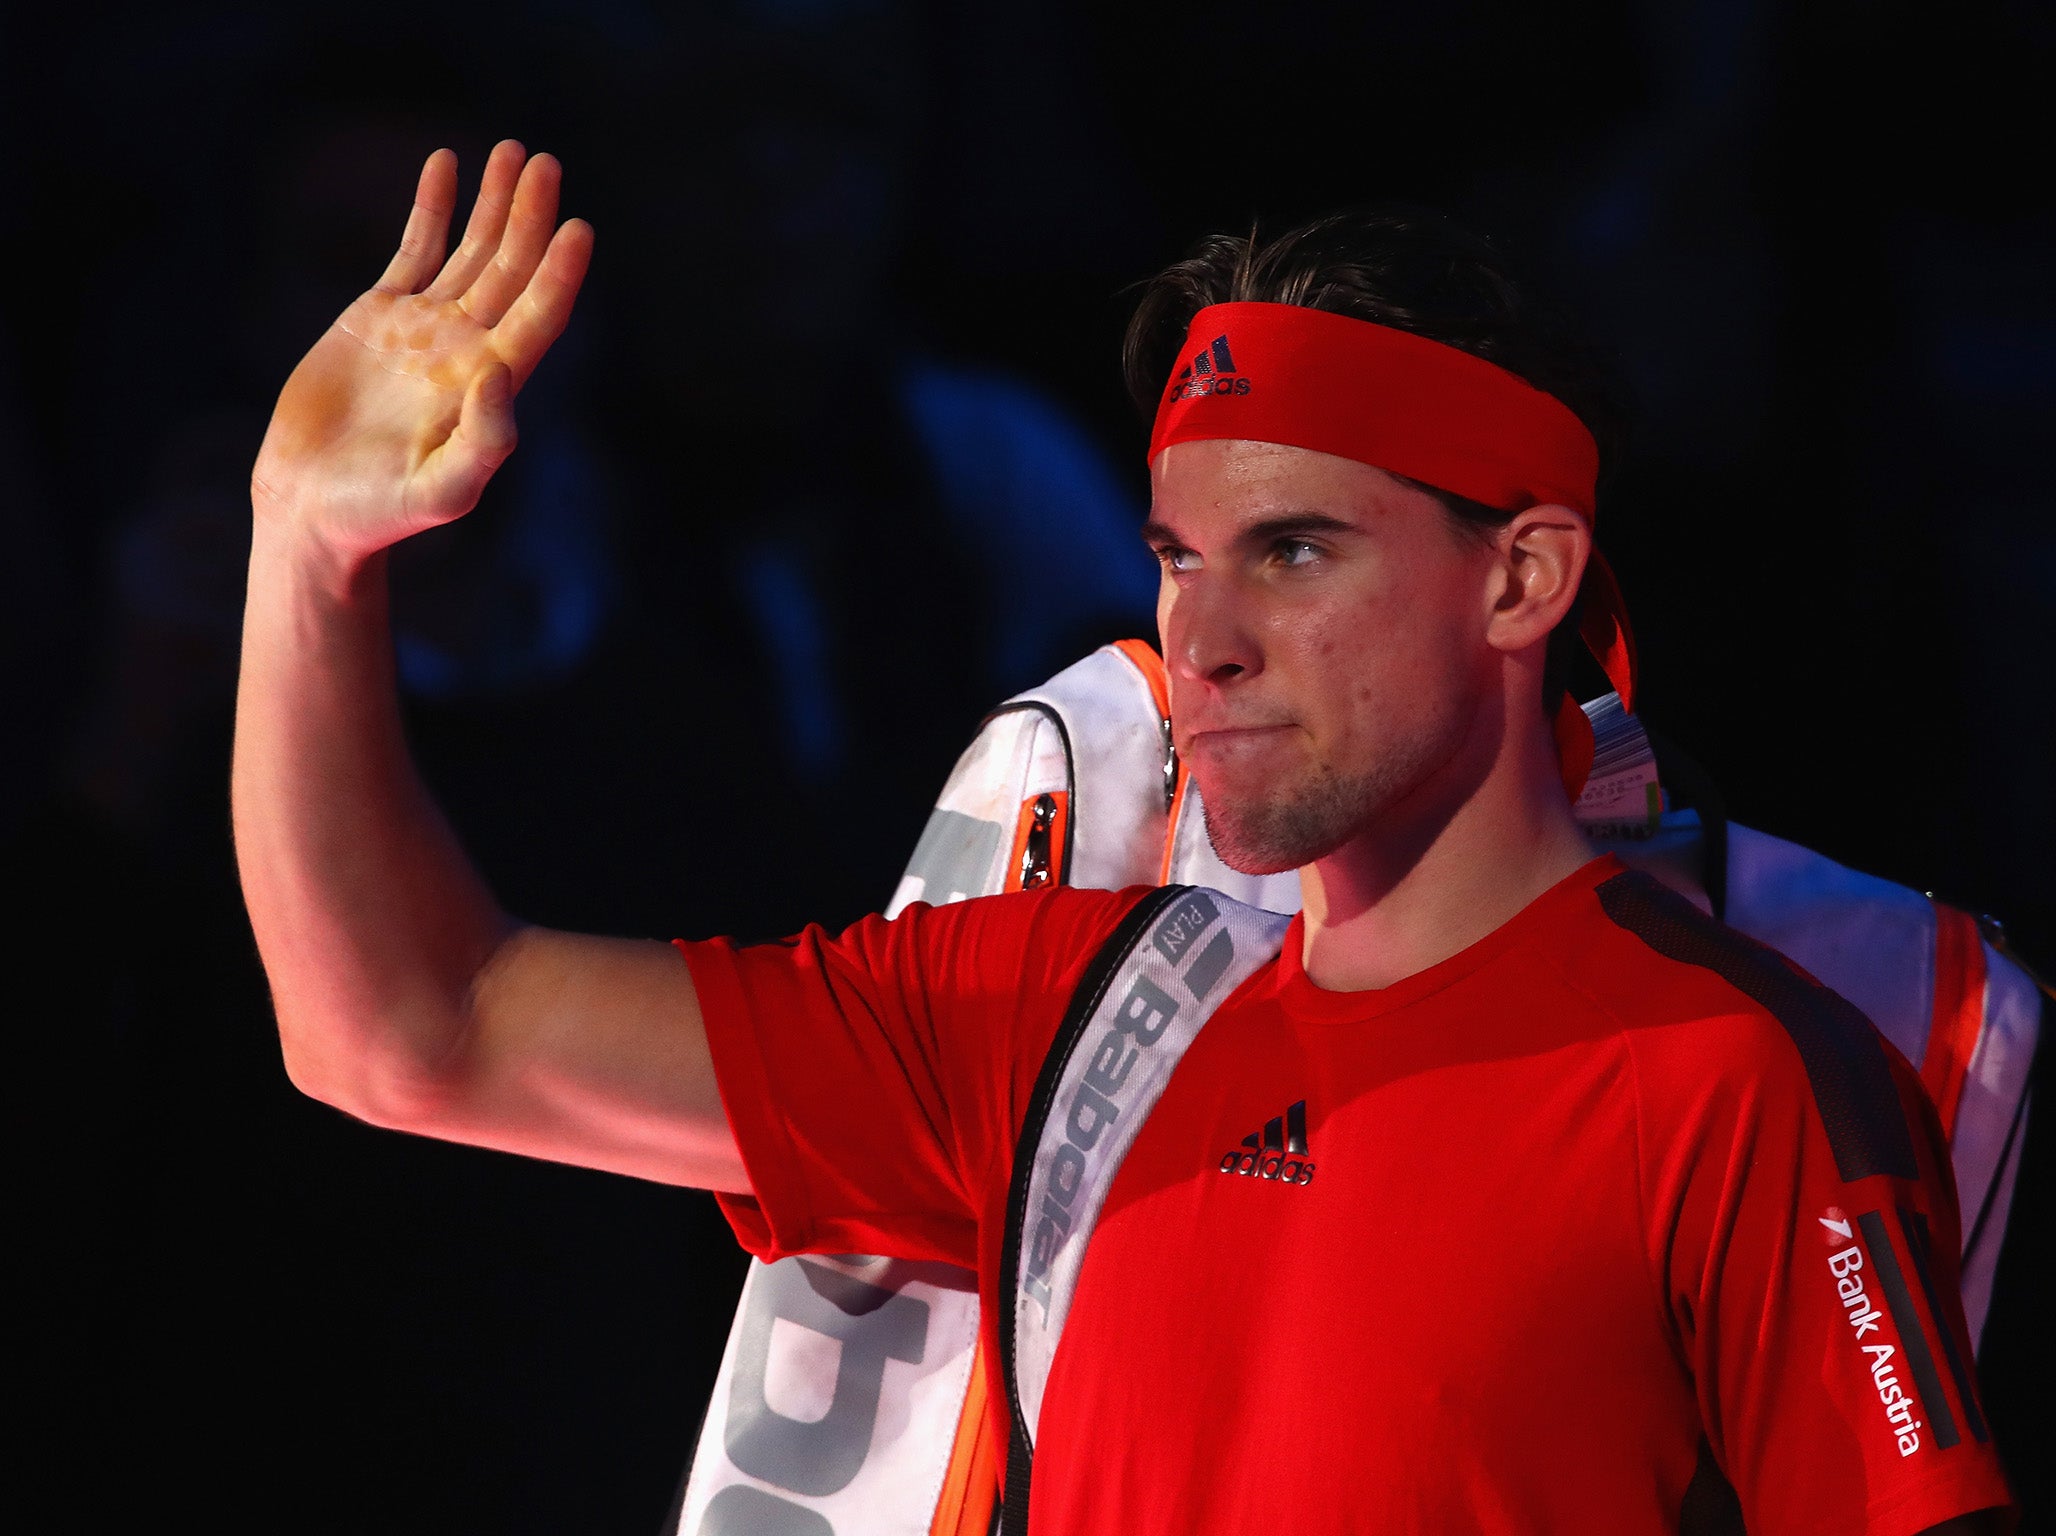 Thiem could be the man to challenge Nadal for the title at this year’s French Open